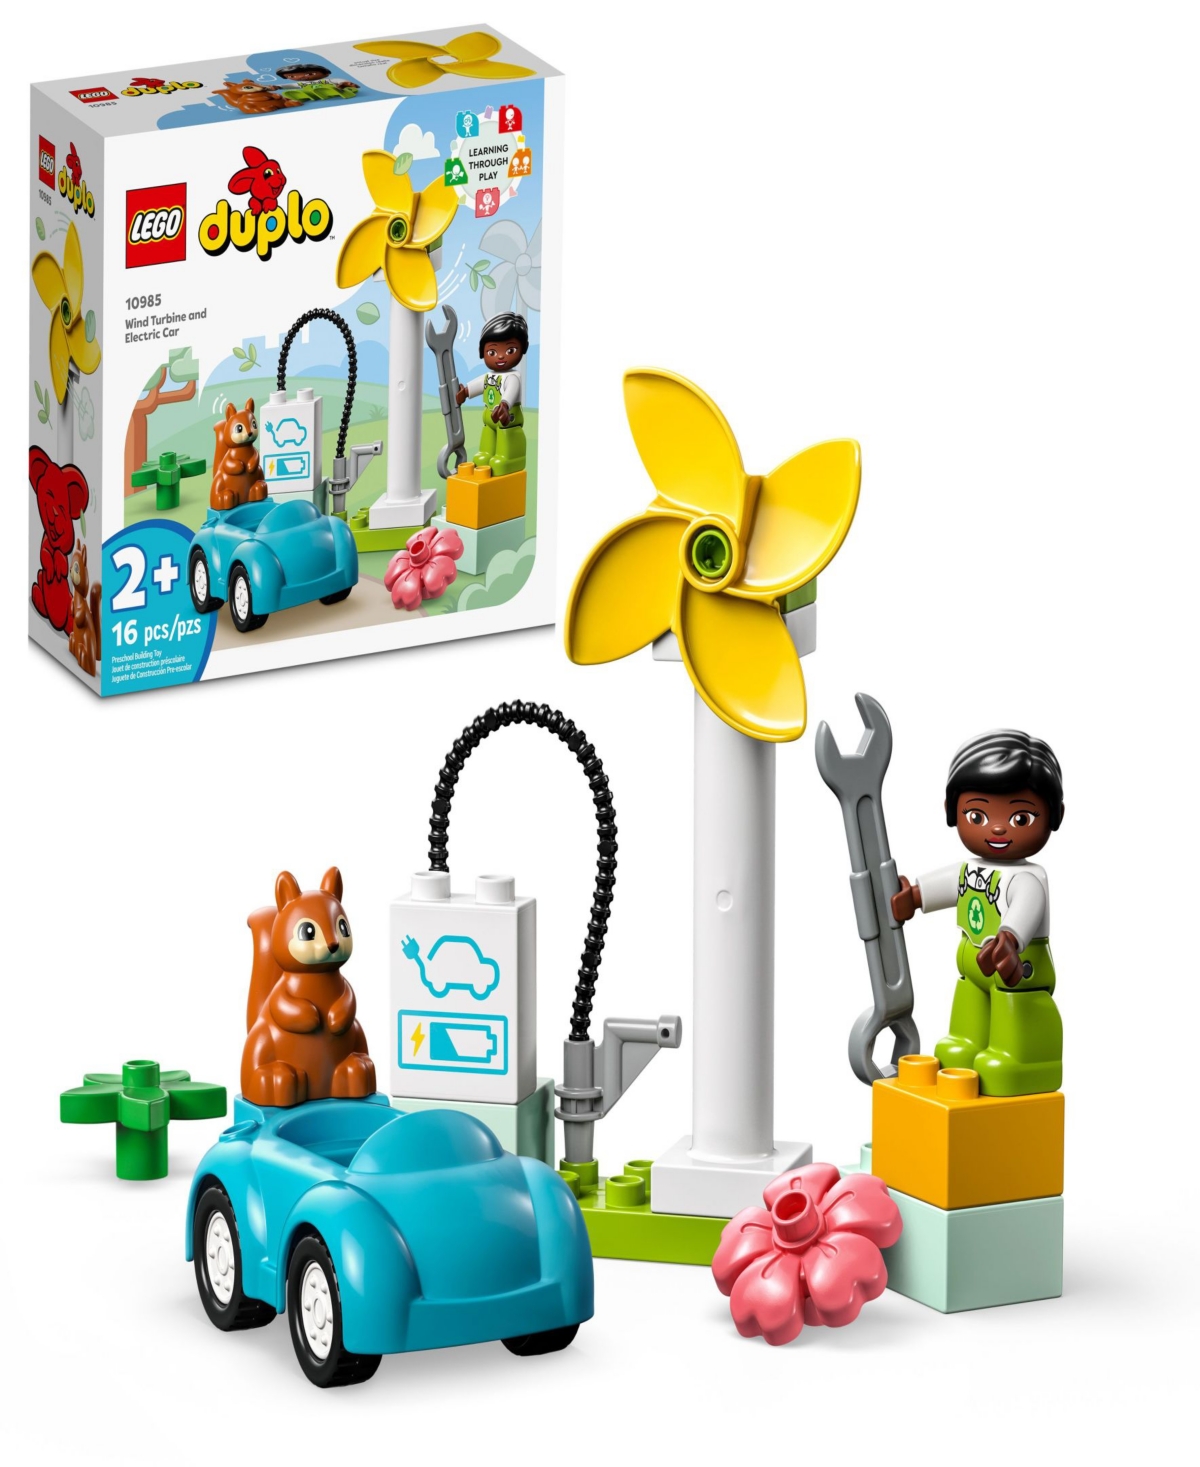 Lego Babies' Duplo Town Wind Turbine And Electric Car 10985 Building Toy Set 16 Pieces In Multicolor